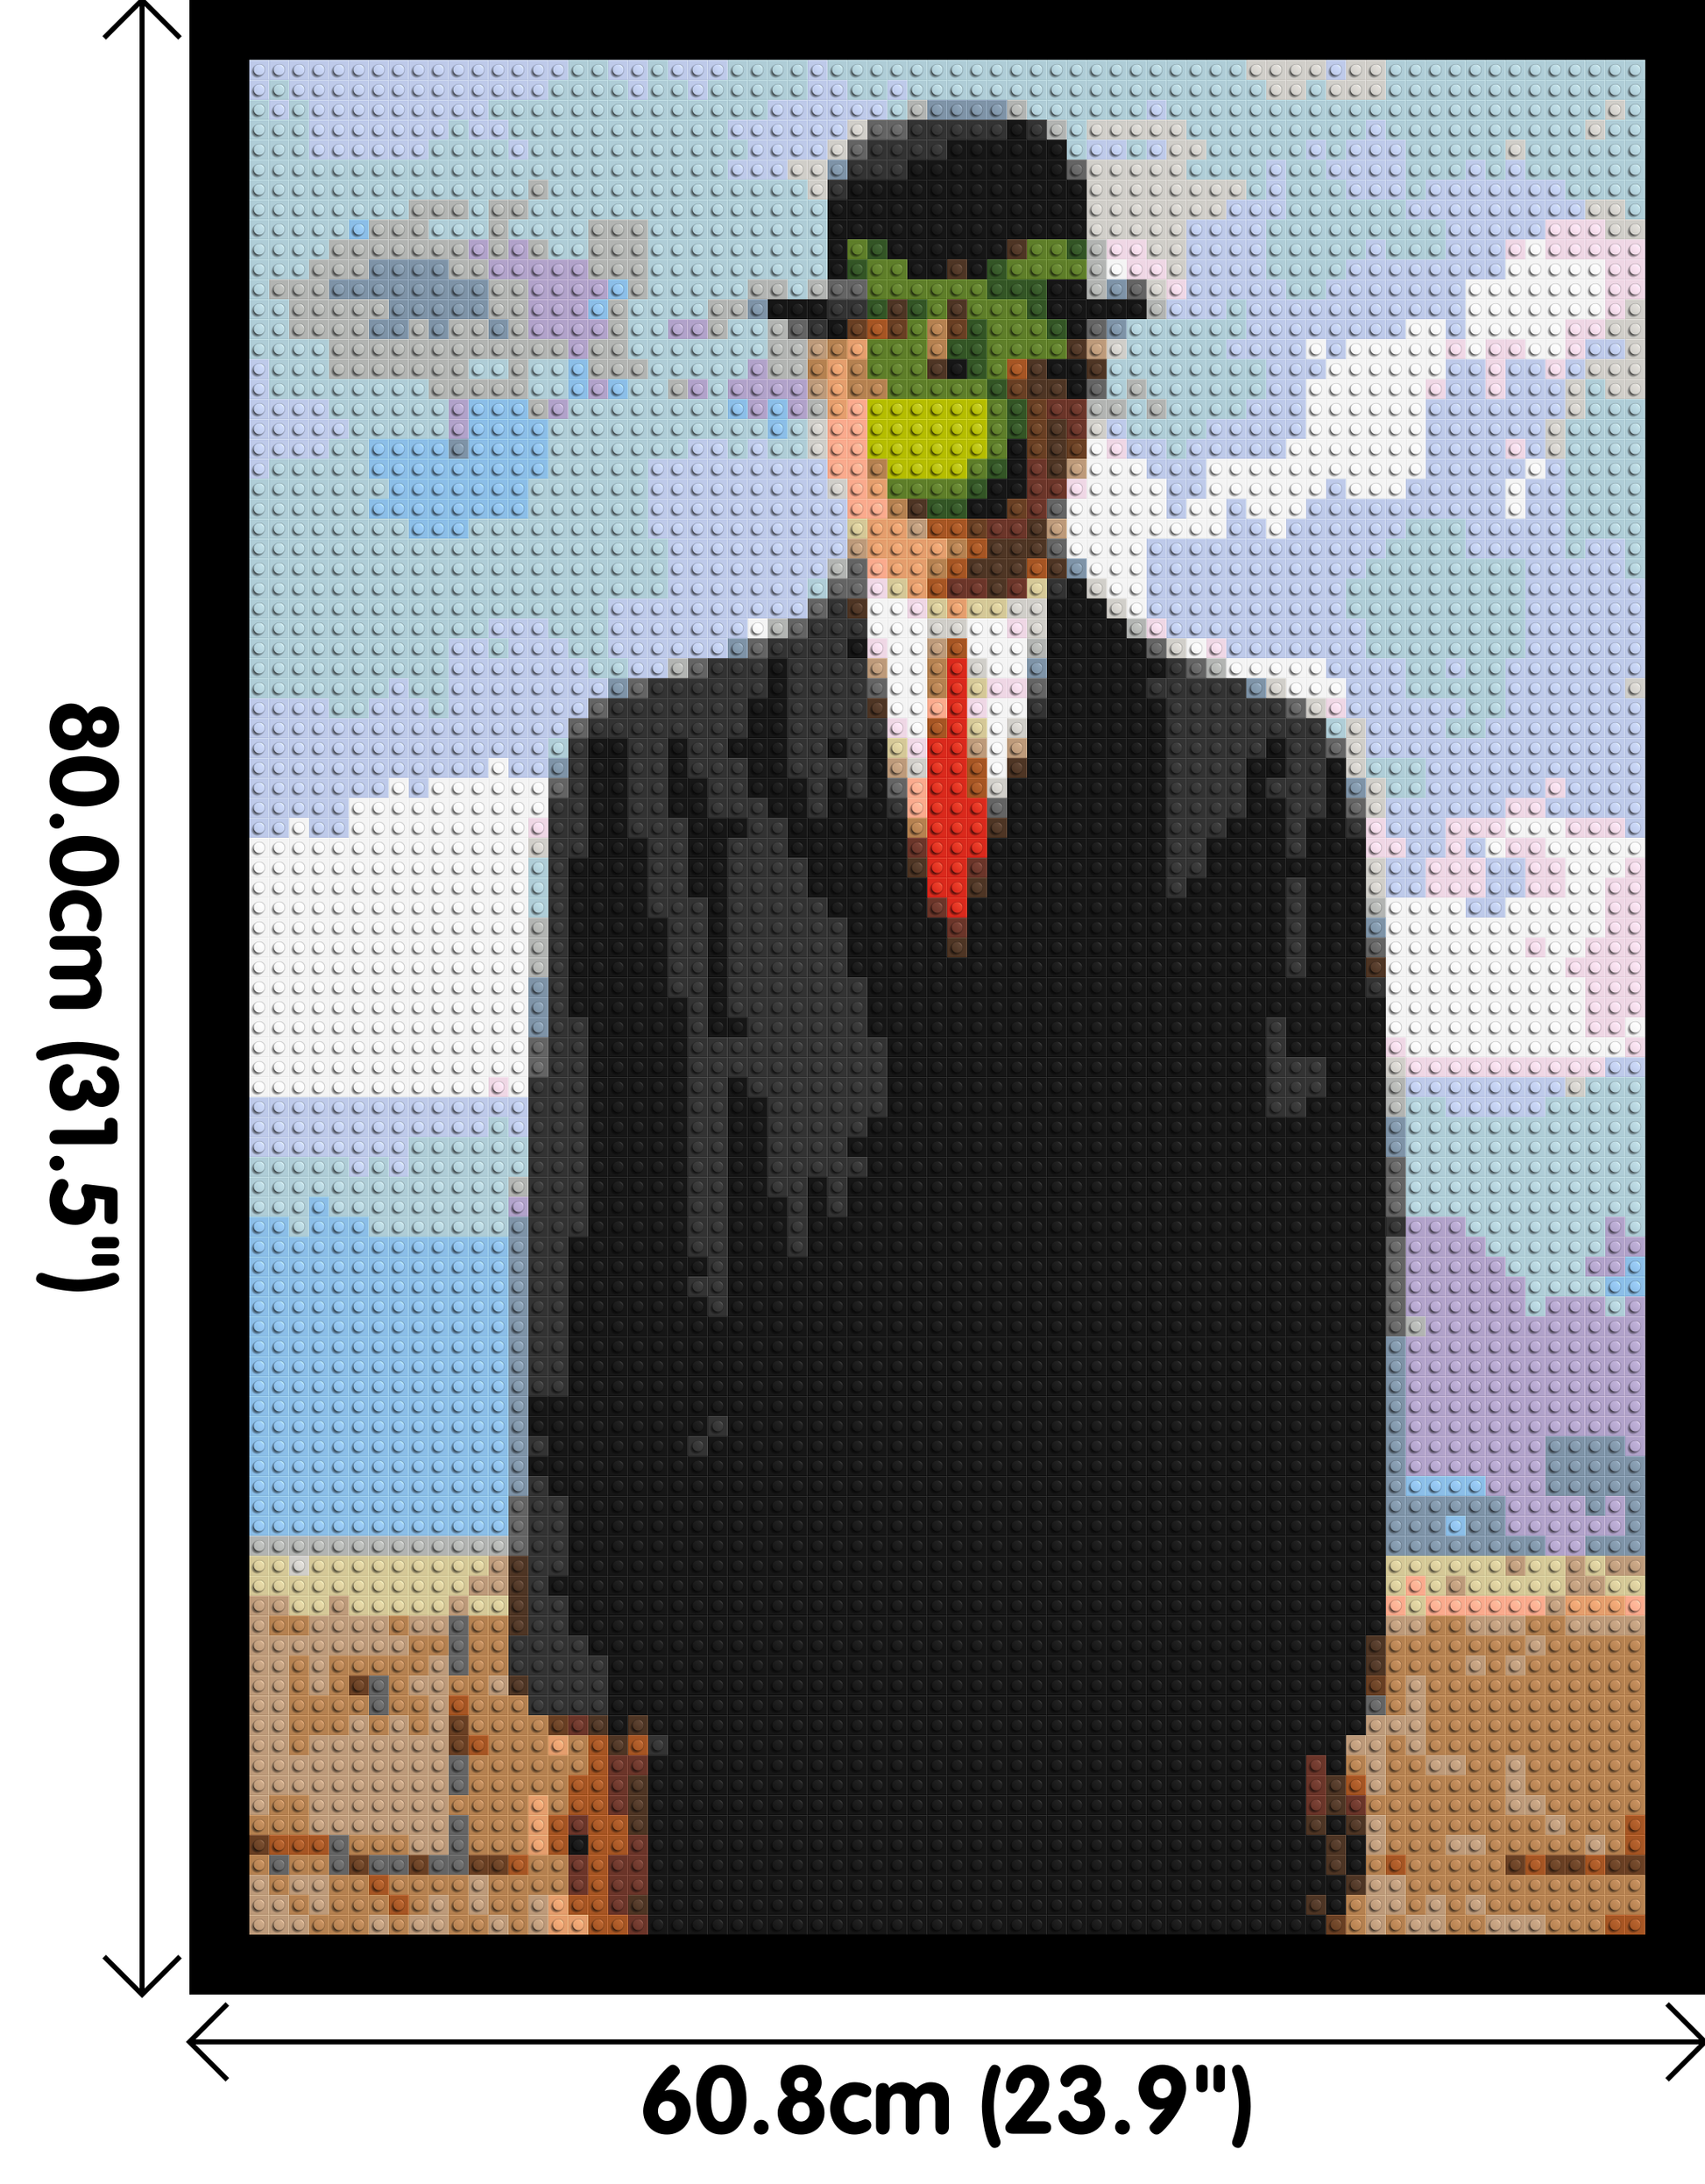 The Son of Man by René Magritte - Brick Art Mosaic Kit 3x4 dimensions with frame